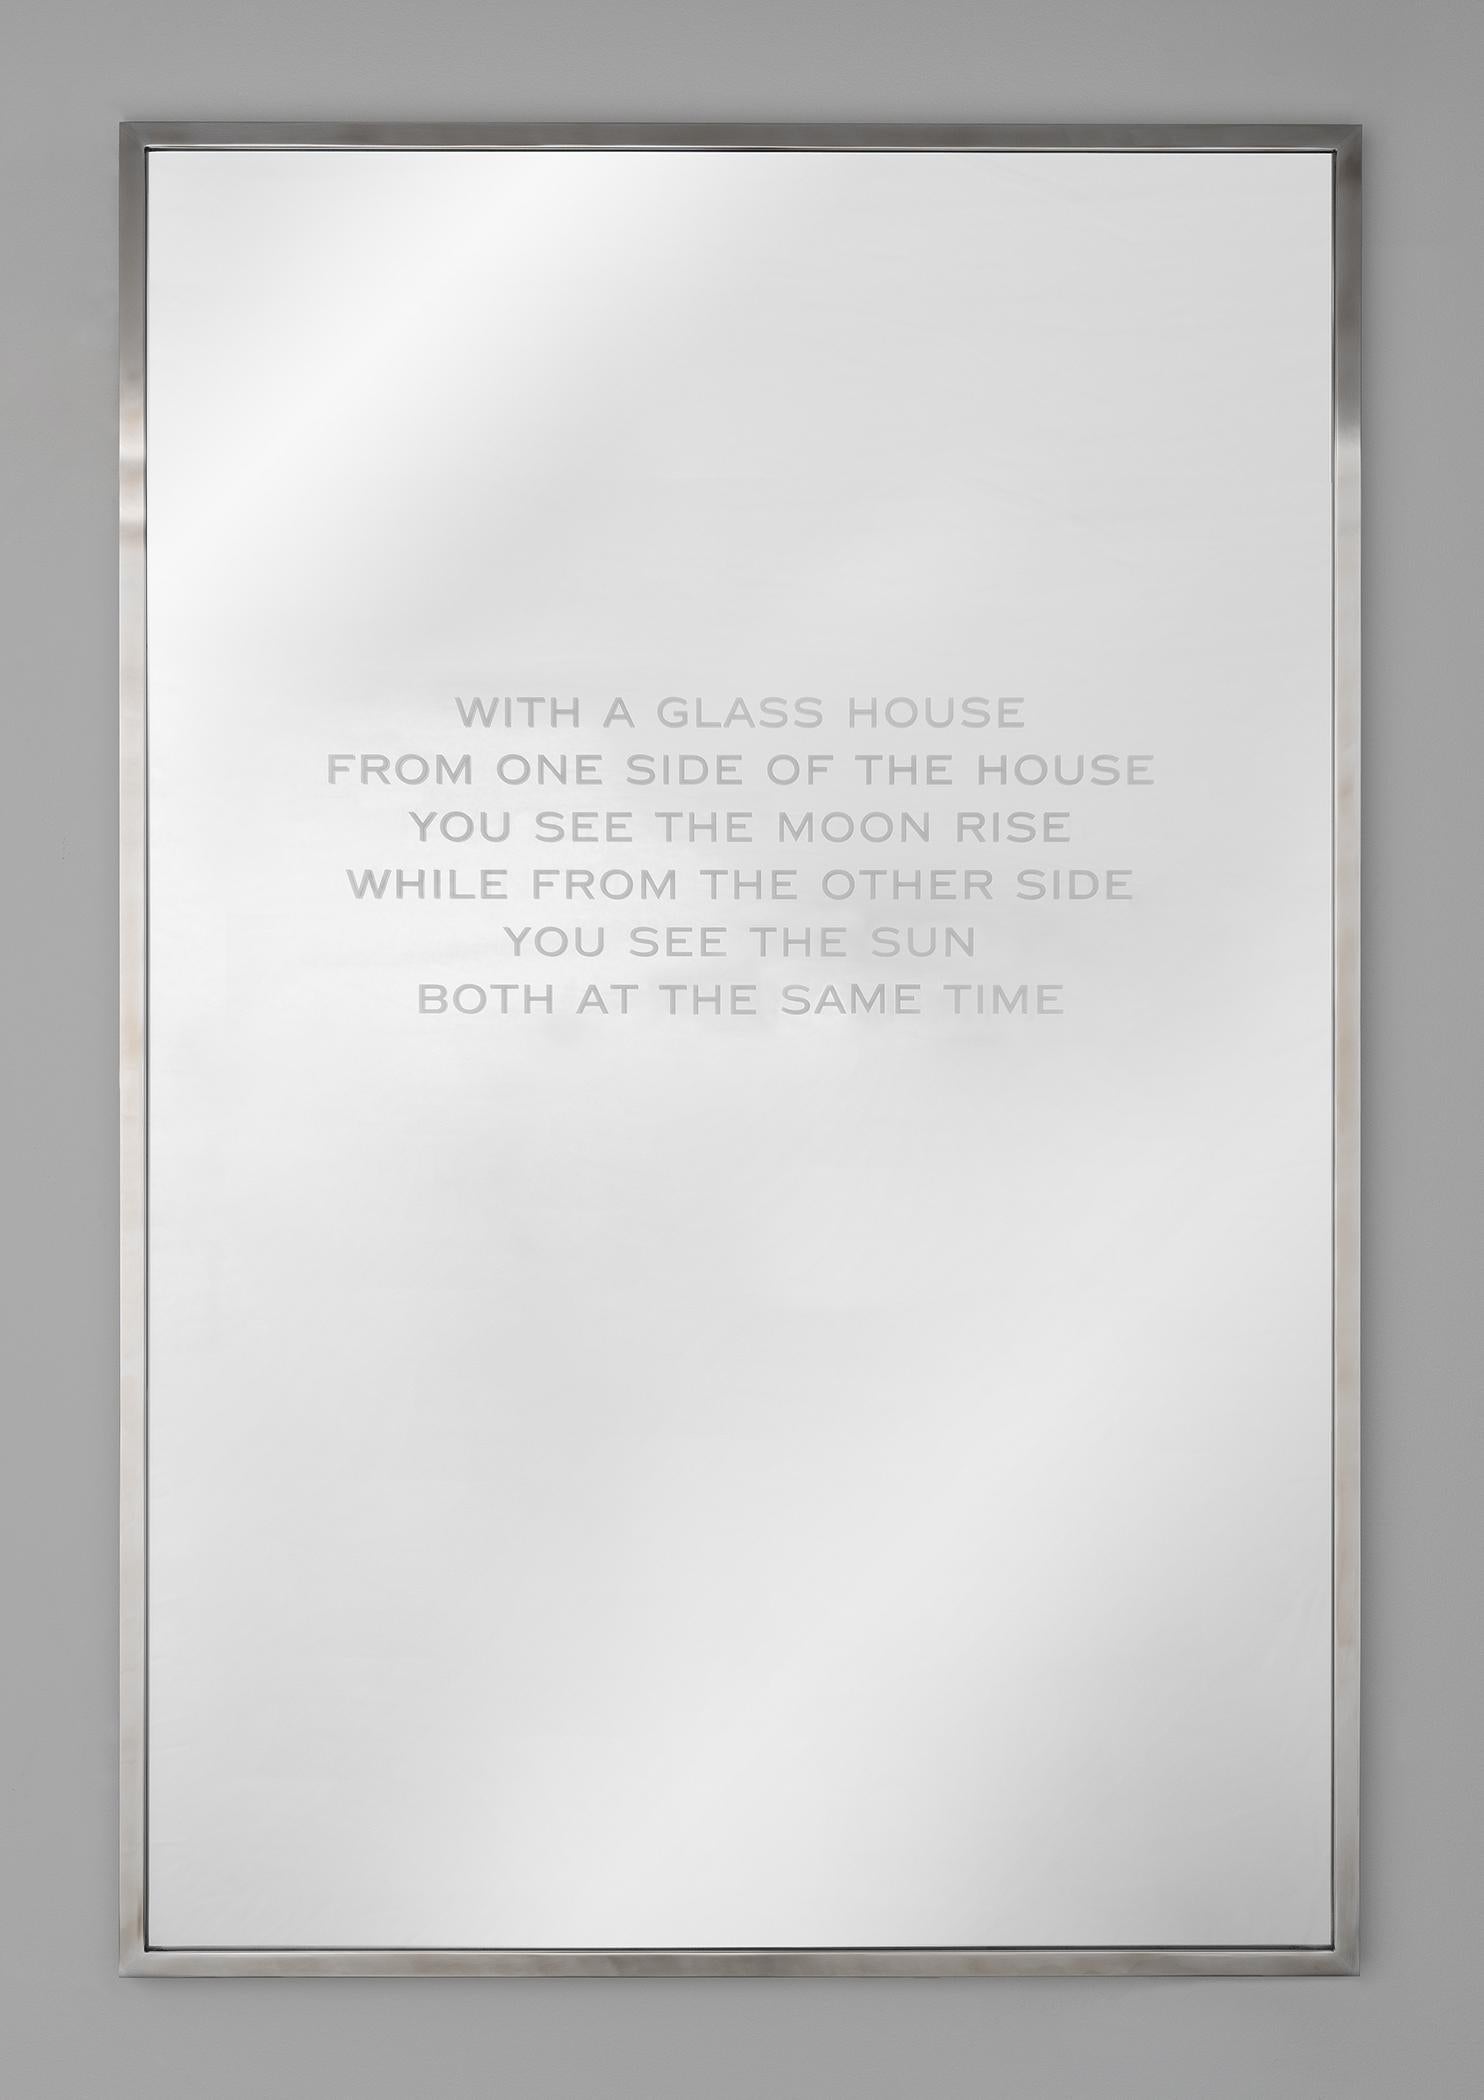 Jenny Holzer
In a glass house, 2018
Etched glass mirror
36 x 24 inches
Edition of 15, 5 AP's
Stamped and numbered
Text from Philip Johnson: The Architect in His Own Words by Hilary Lewis and John O'Connor 1994. Used with permission. 2018 Jenny